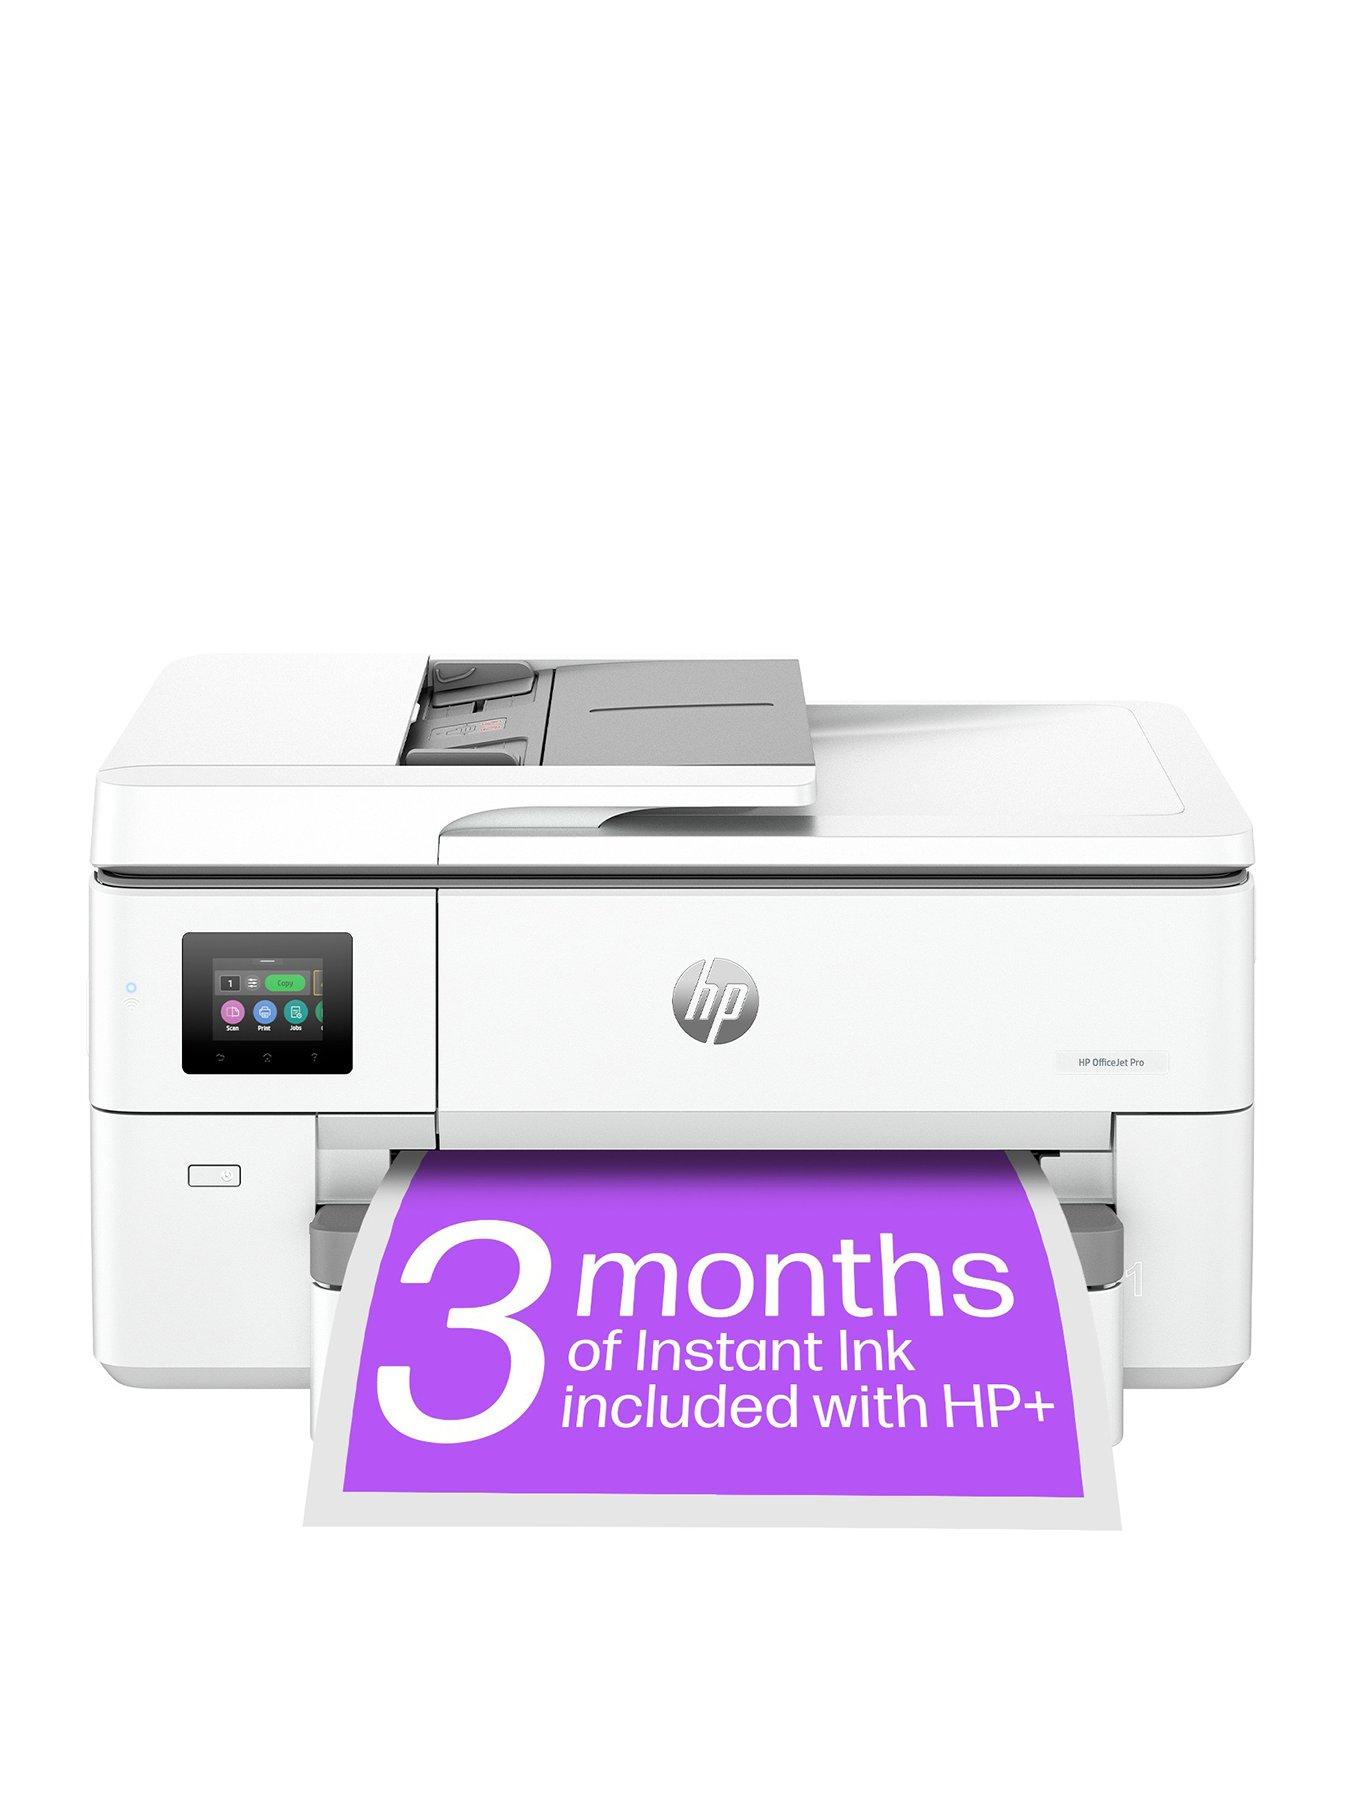 Hp Officejet Pro 9720E A3 All-In-One Wireless Colour Printer With 3 Months Of Instant Ink Included With Hp+